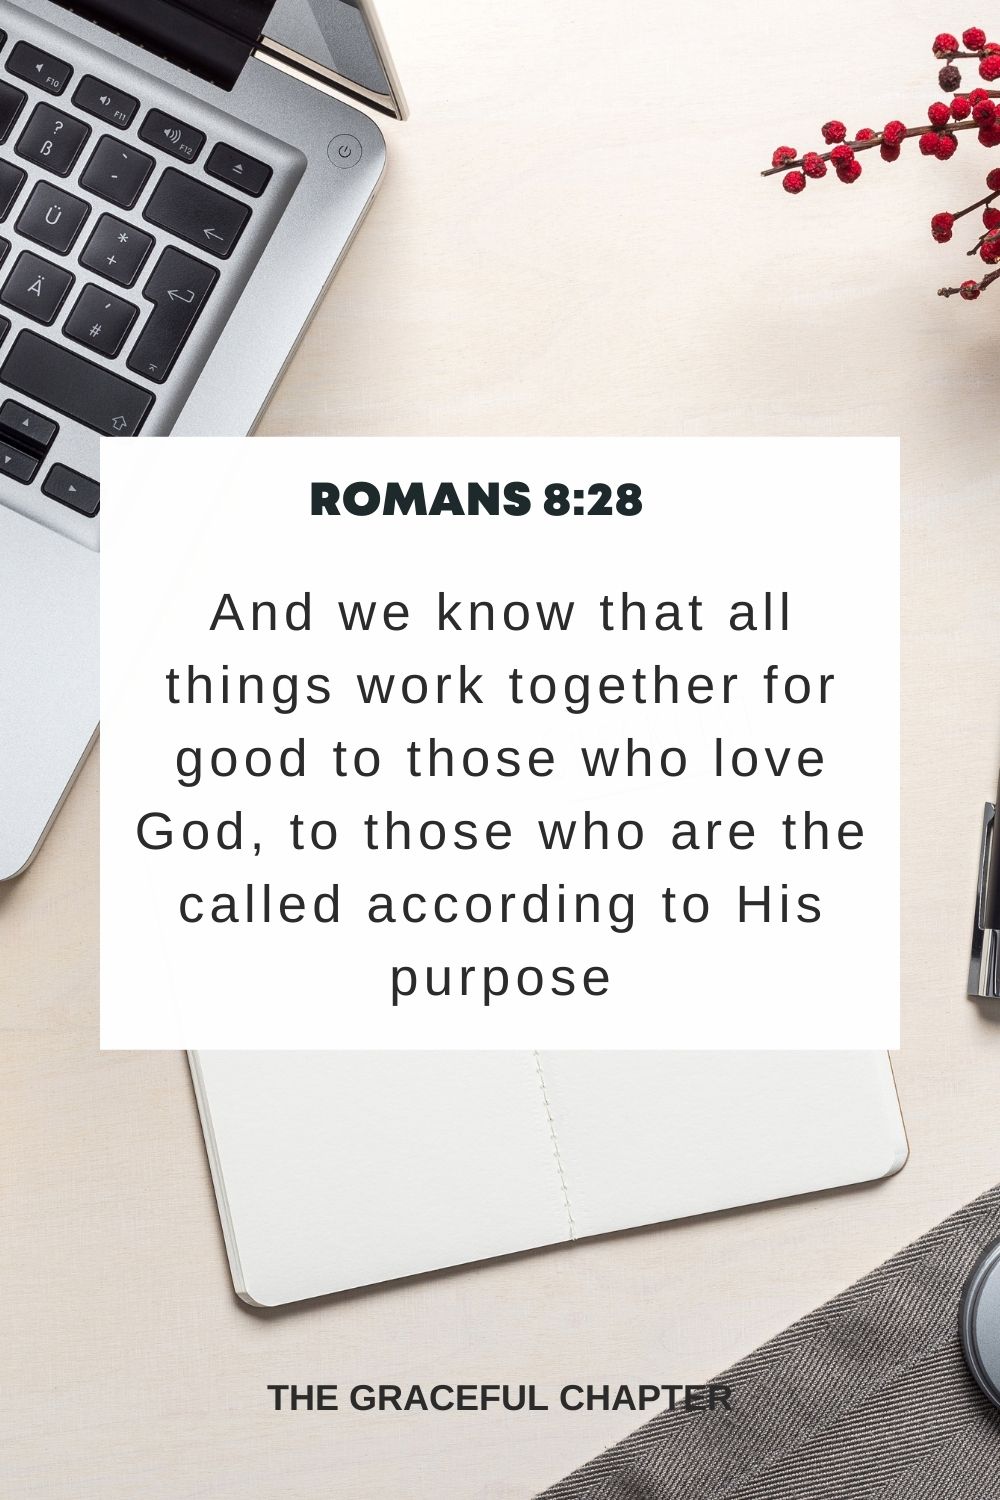 And we know that all things work together for good to those who love God, to those who are the called according to His purpose Romans 8:28